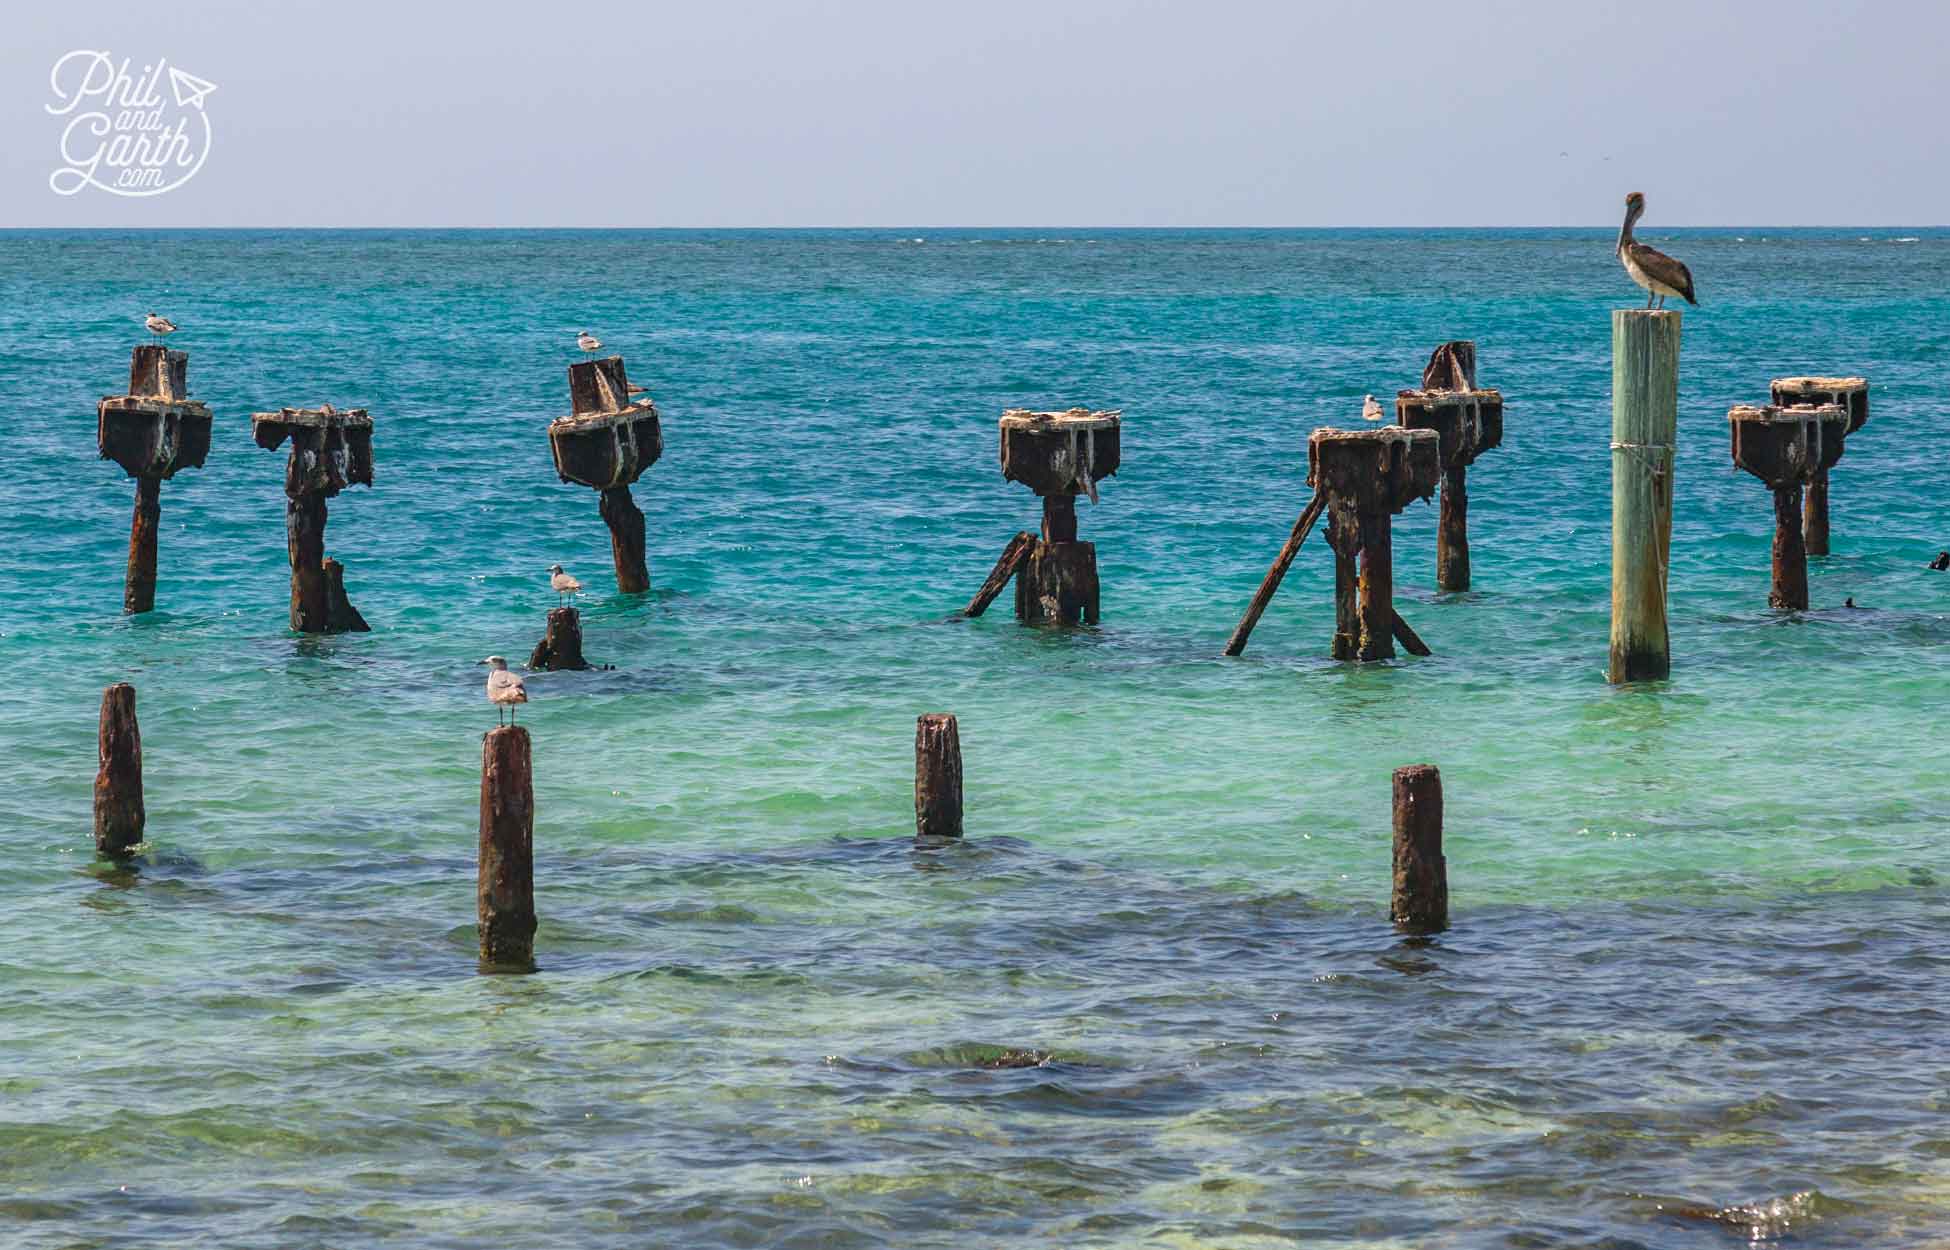 Old pilings that stick up out of the water are a great place to snorkel